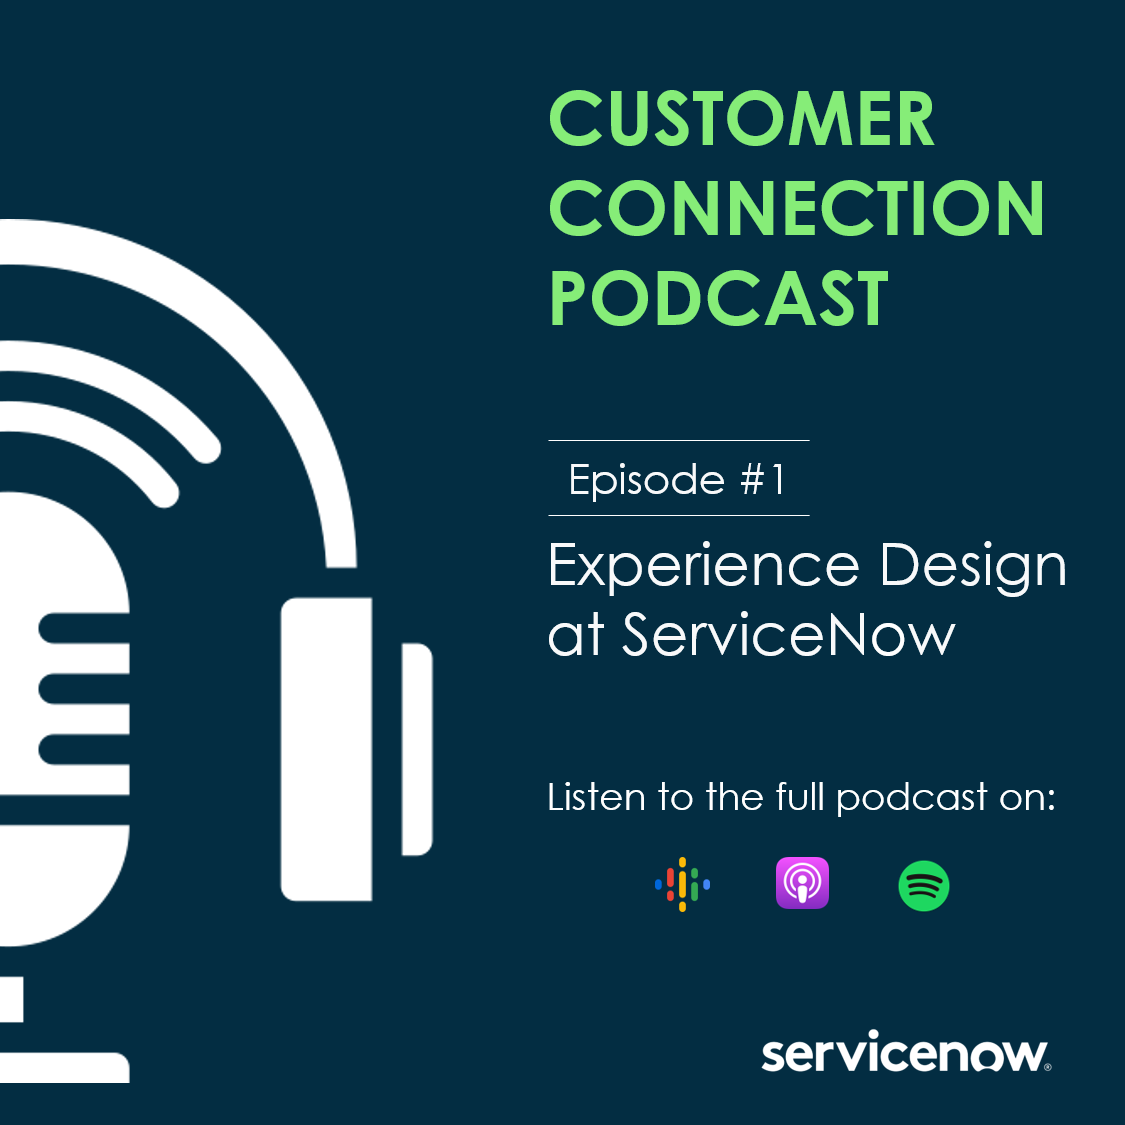 Experience Design at ServiceNow